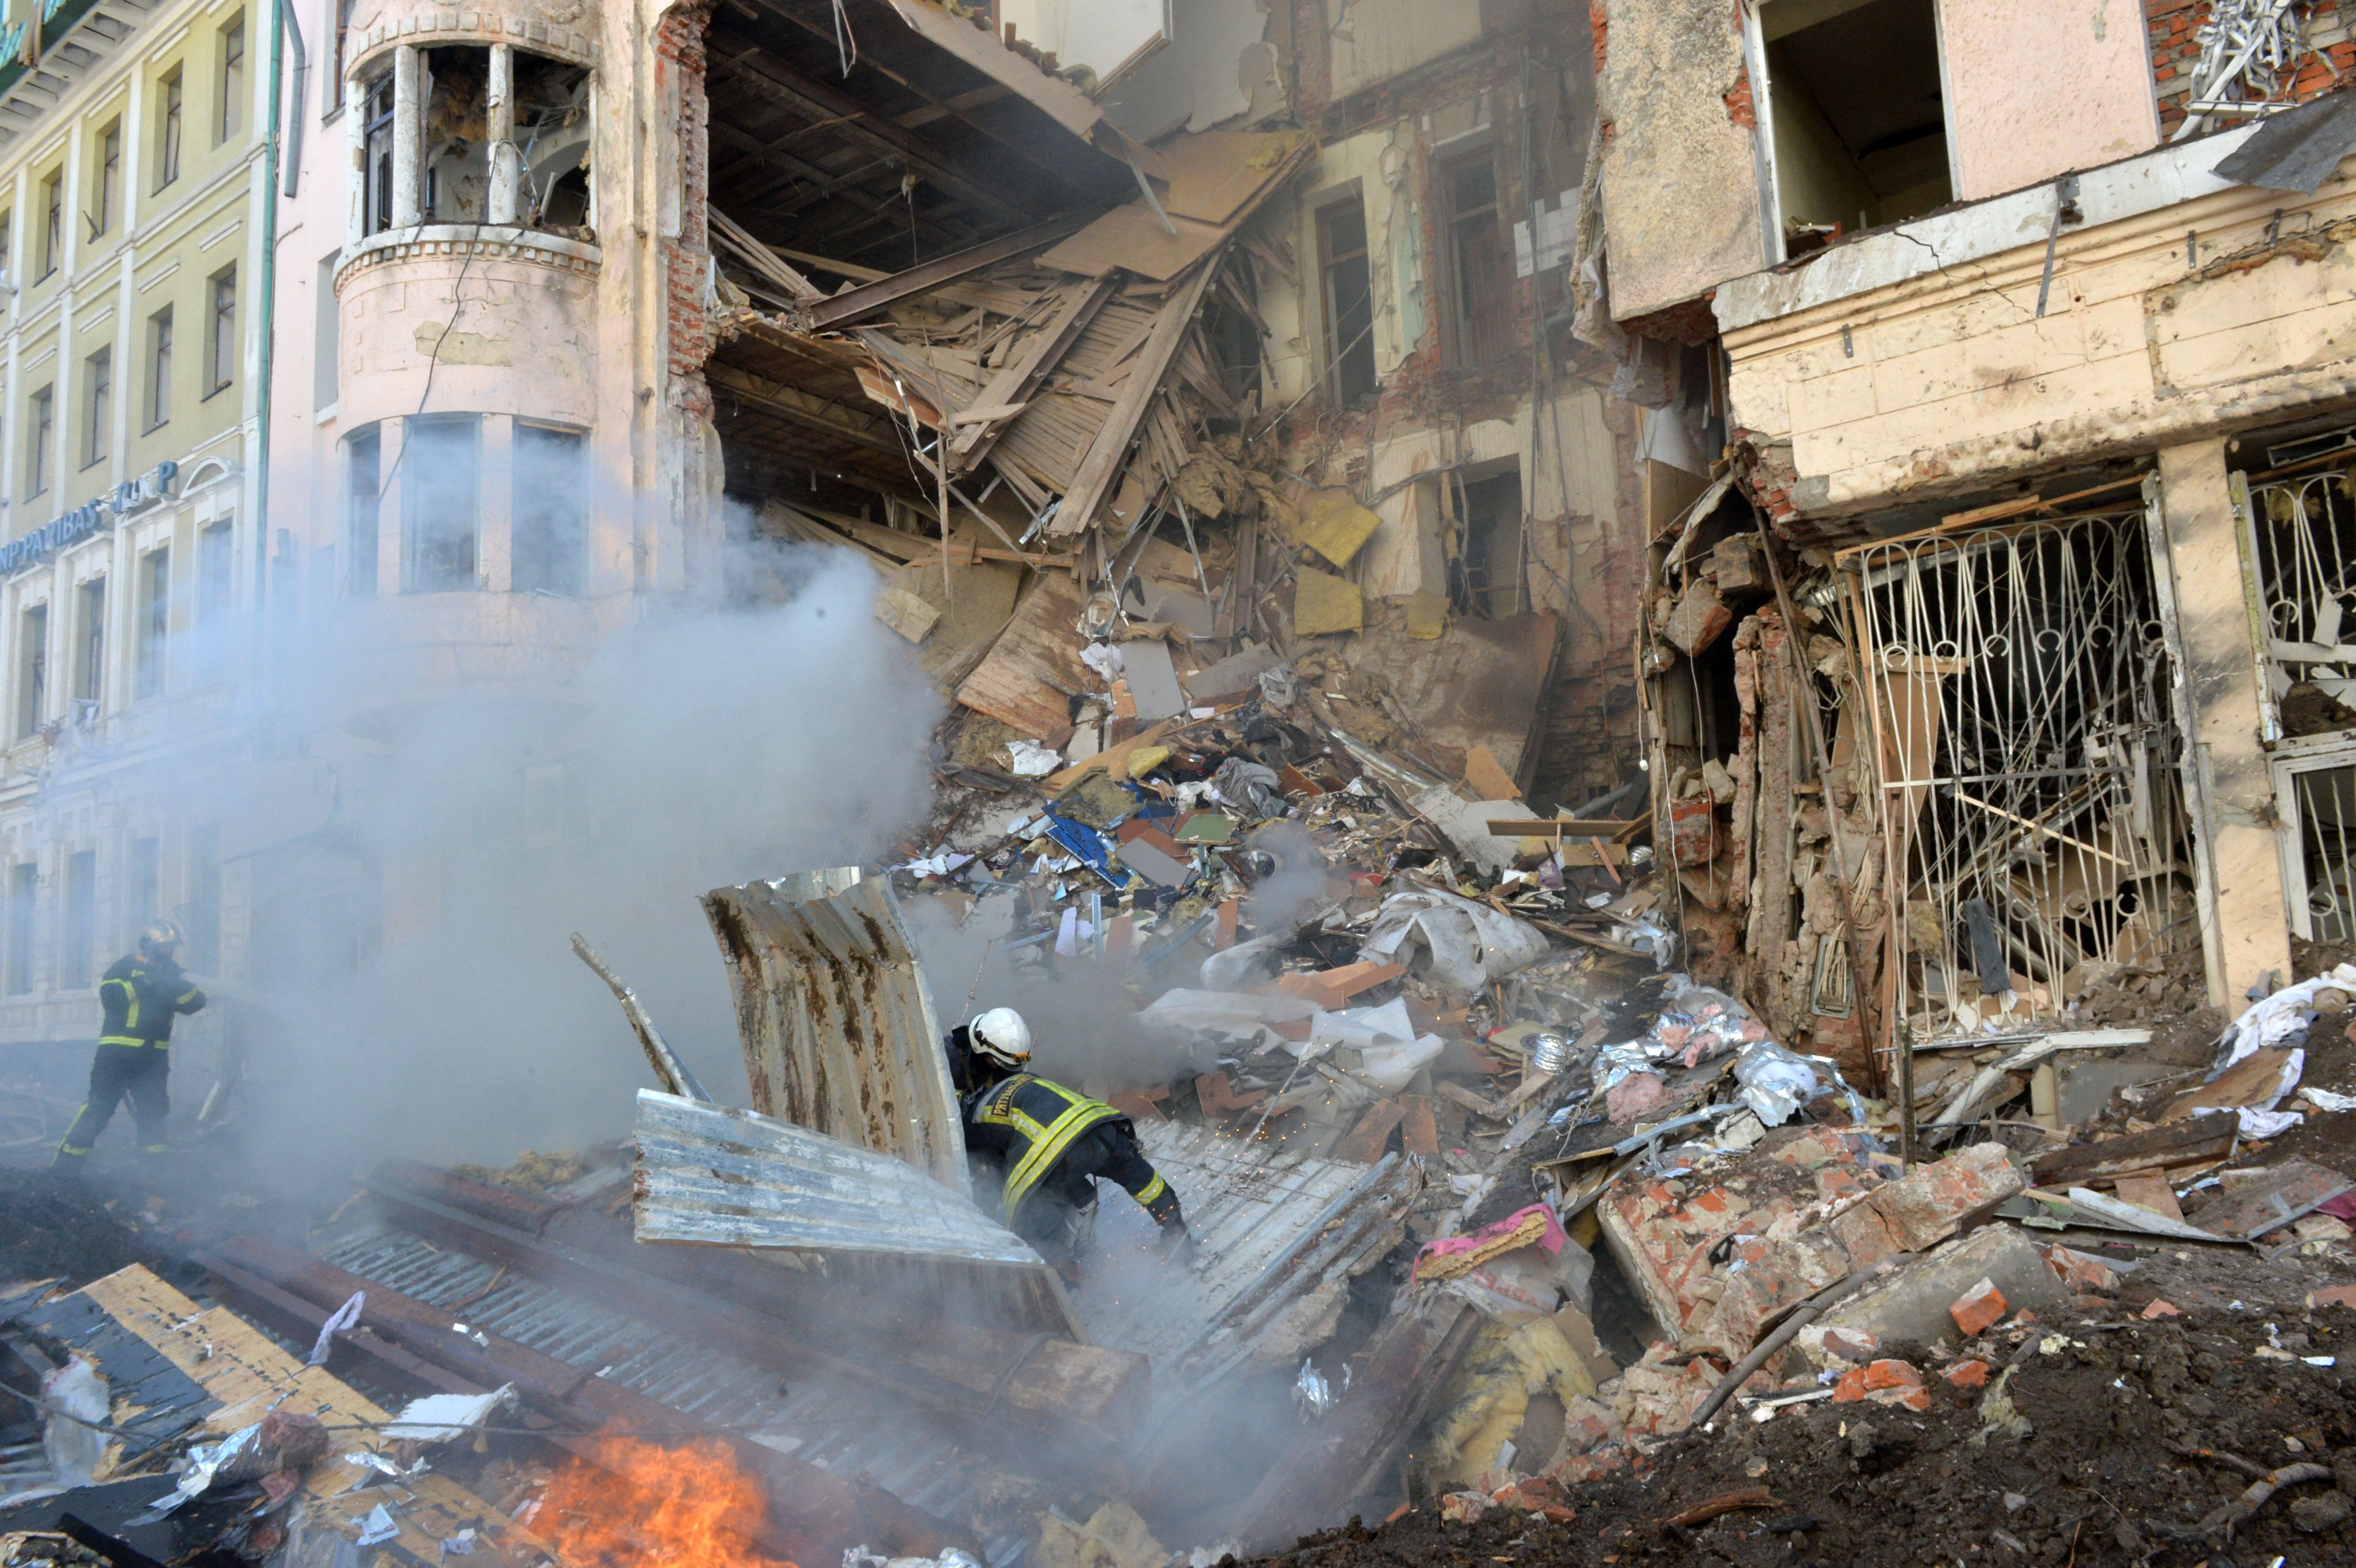 Firemen work to clear the rubble and extinguish a fire by a heavily damaged building after a Russian rocket exploded just outside it in Ukraine's second city Kharkiv on March 14.